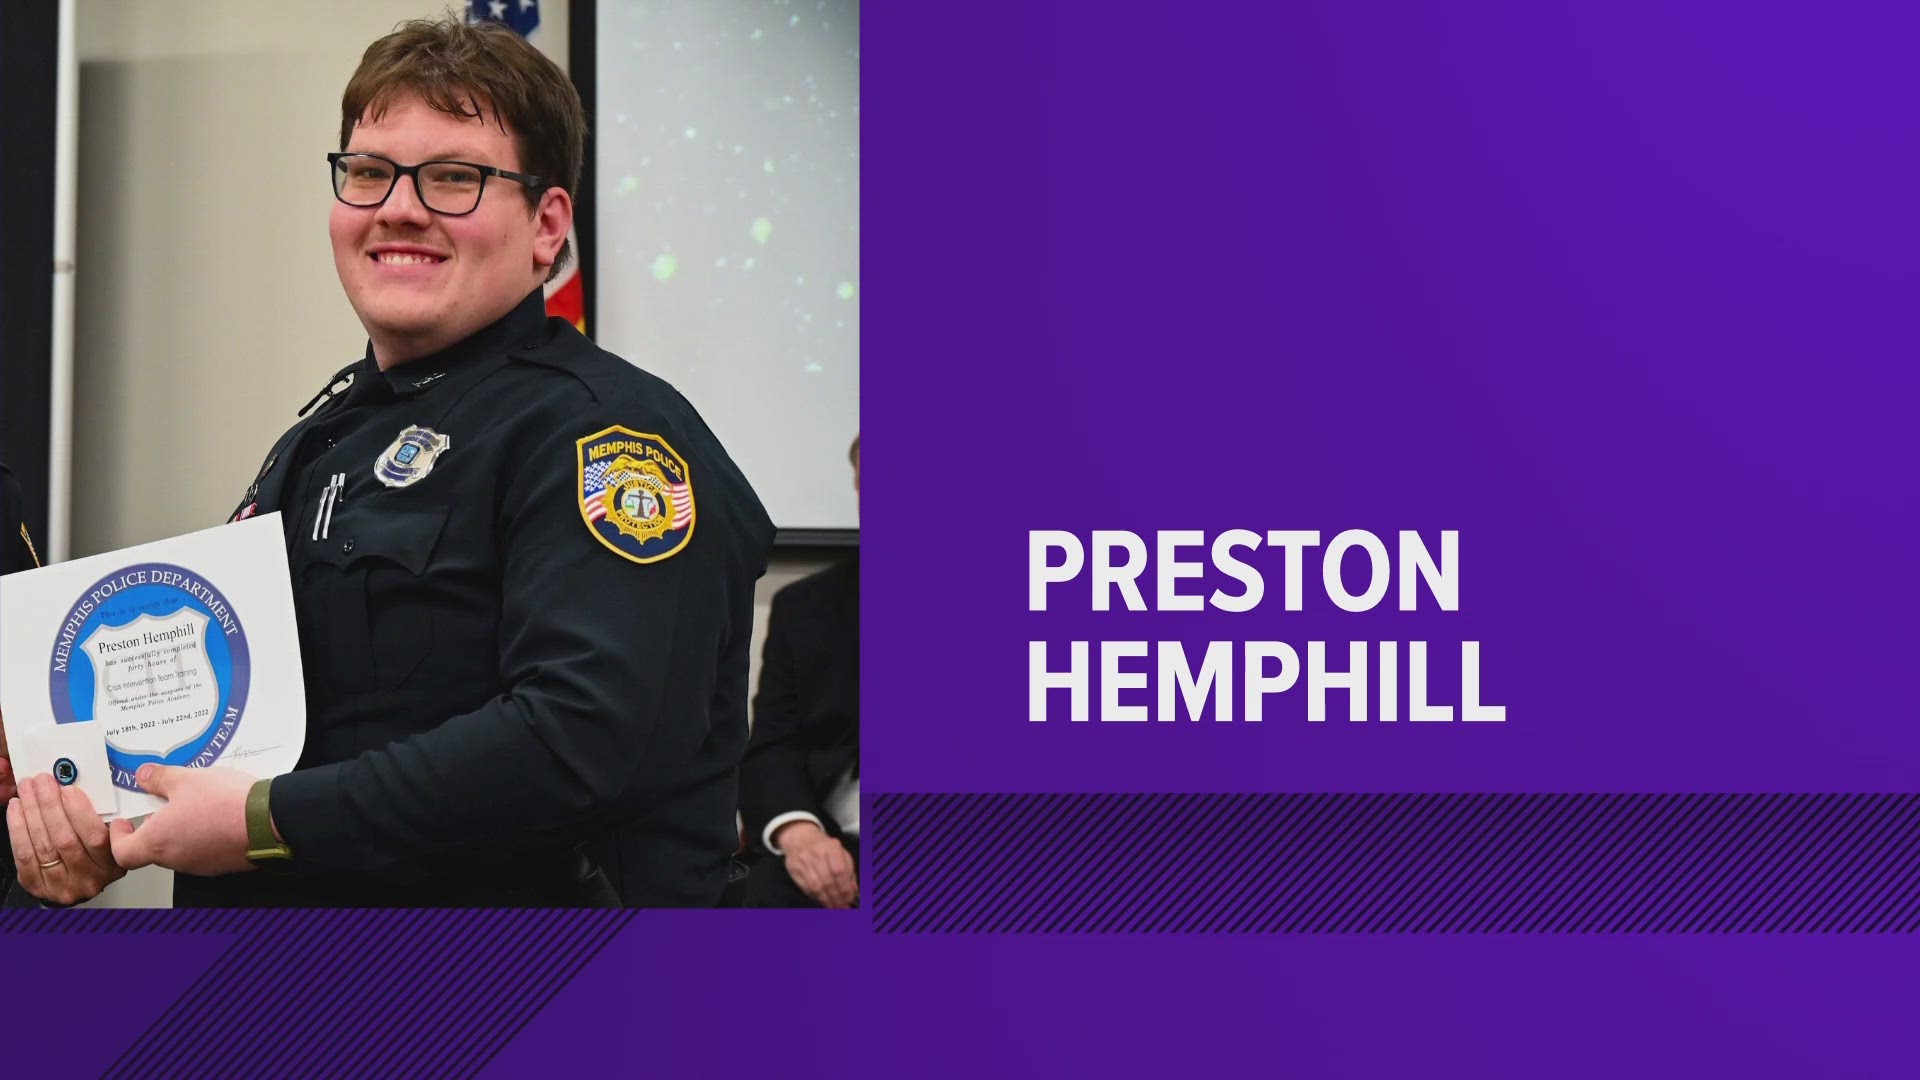 Preston Hemphill and Dewayne Smith have not been charged, but Hemphill was fired and Smith was allowed to retire before he could be fired.